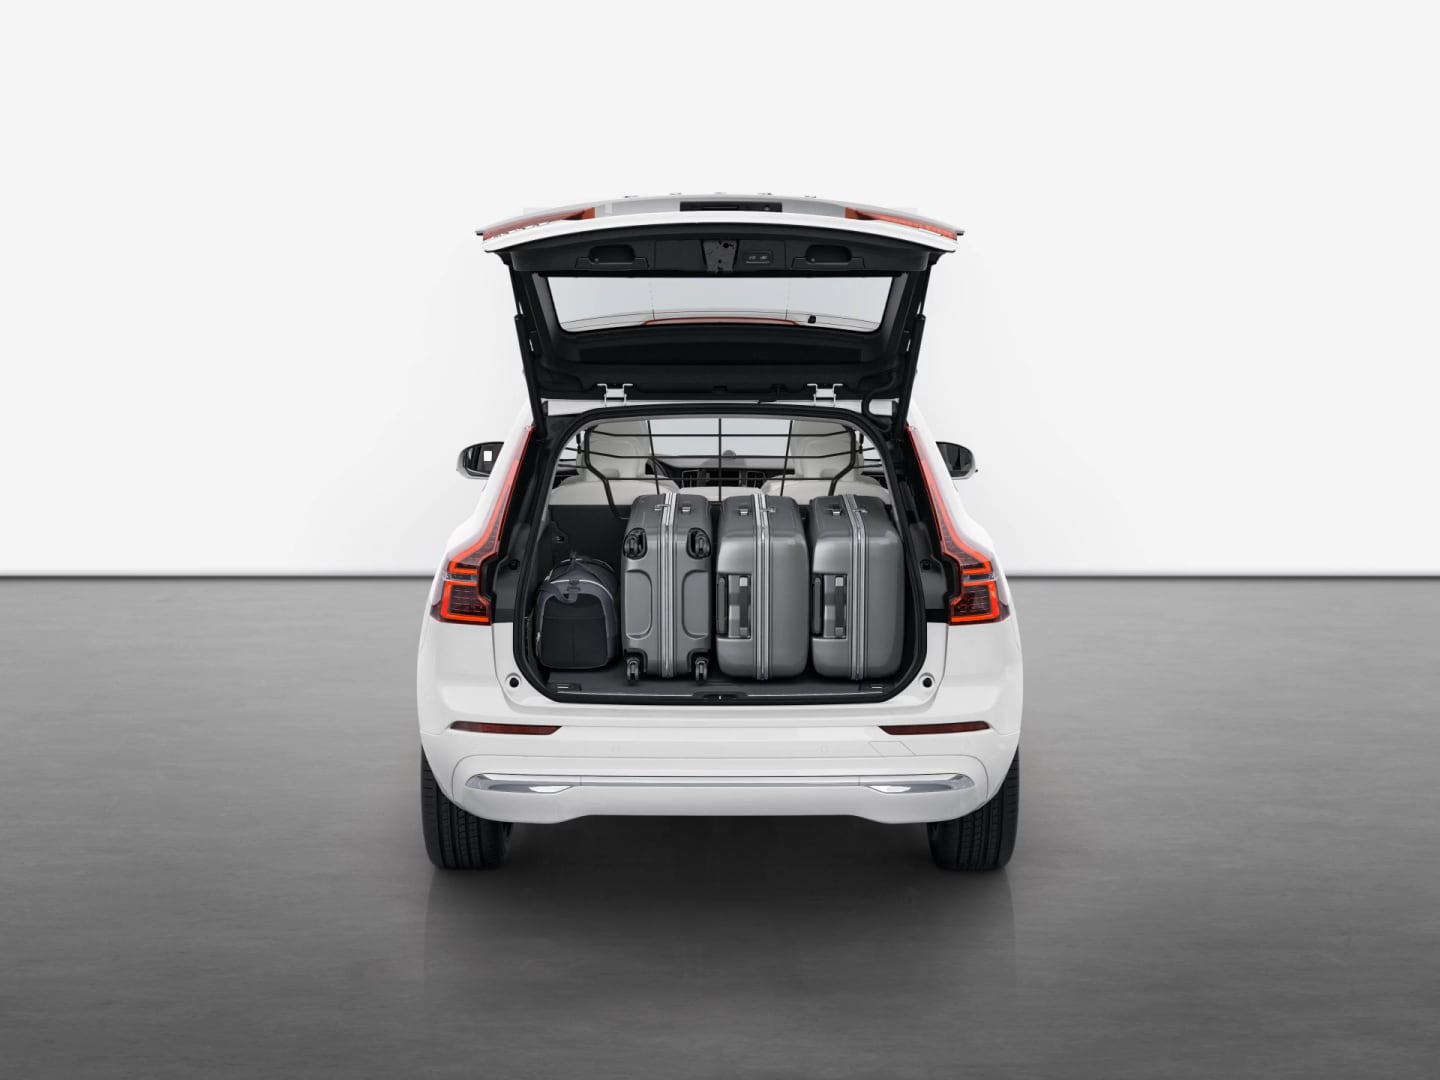 Rear view of the Volvo XC60 plug-in hybrid with the trunk open showing the amount of luggage that fits.